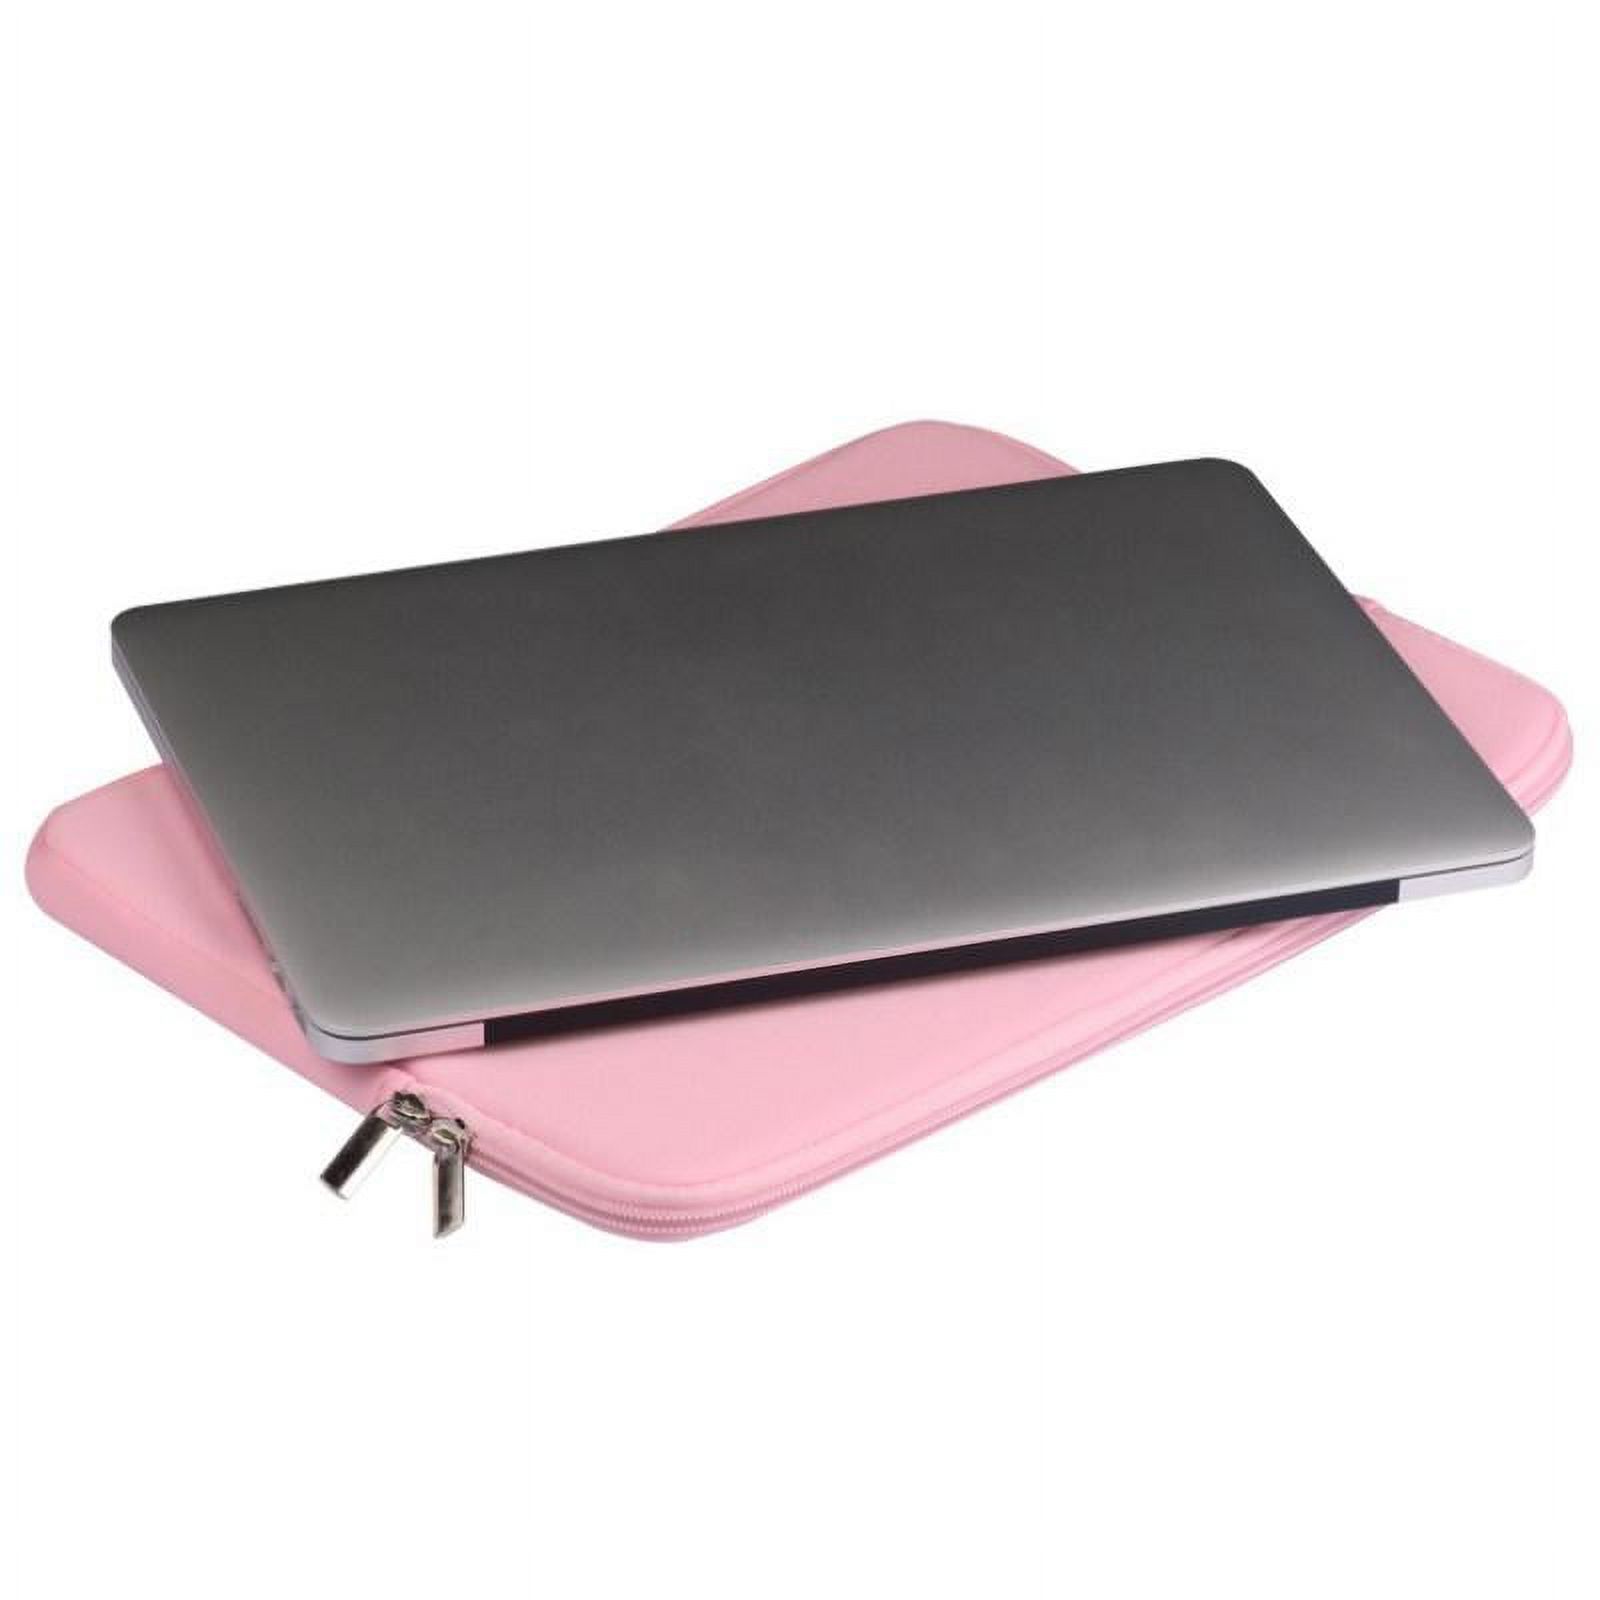 13 Inch Laptop Sleeve 13 Inch Computer Bag 13 inch Netbook Sleeves 13 inch Tablet Carrying Case Cover Bags 13" Notebook Skin Neoprene, Pink - image 2 of 9